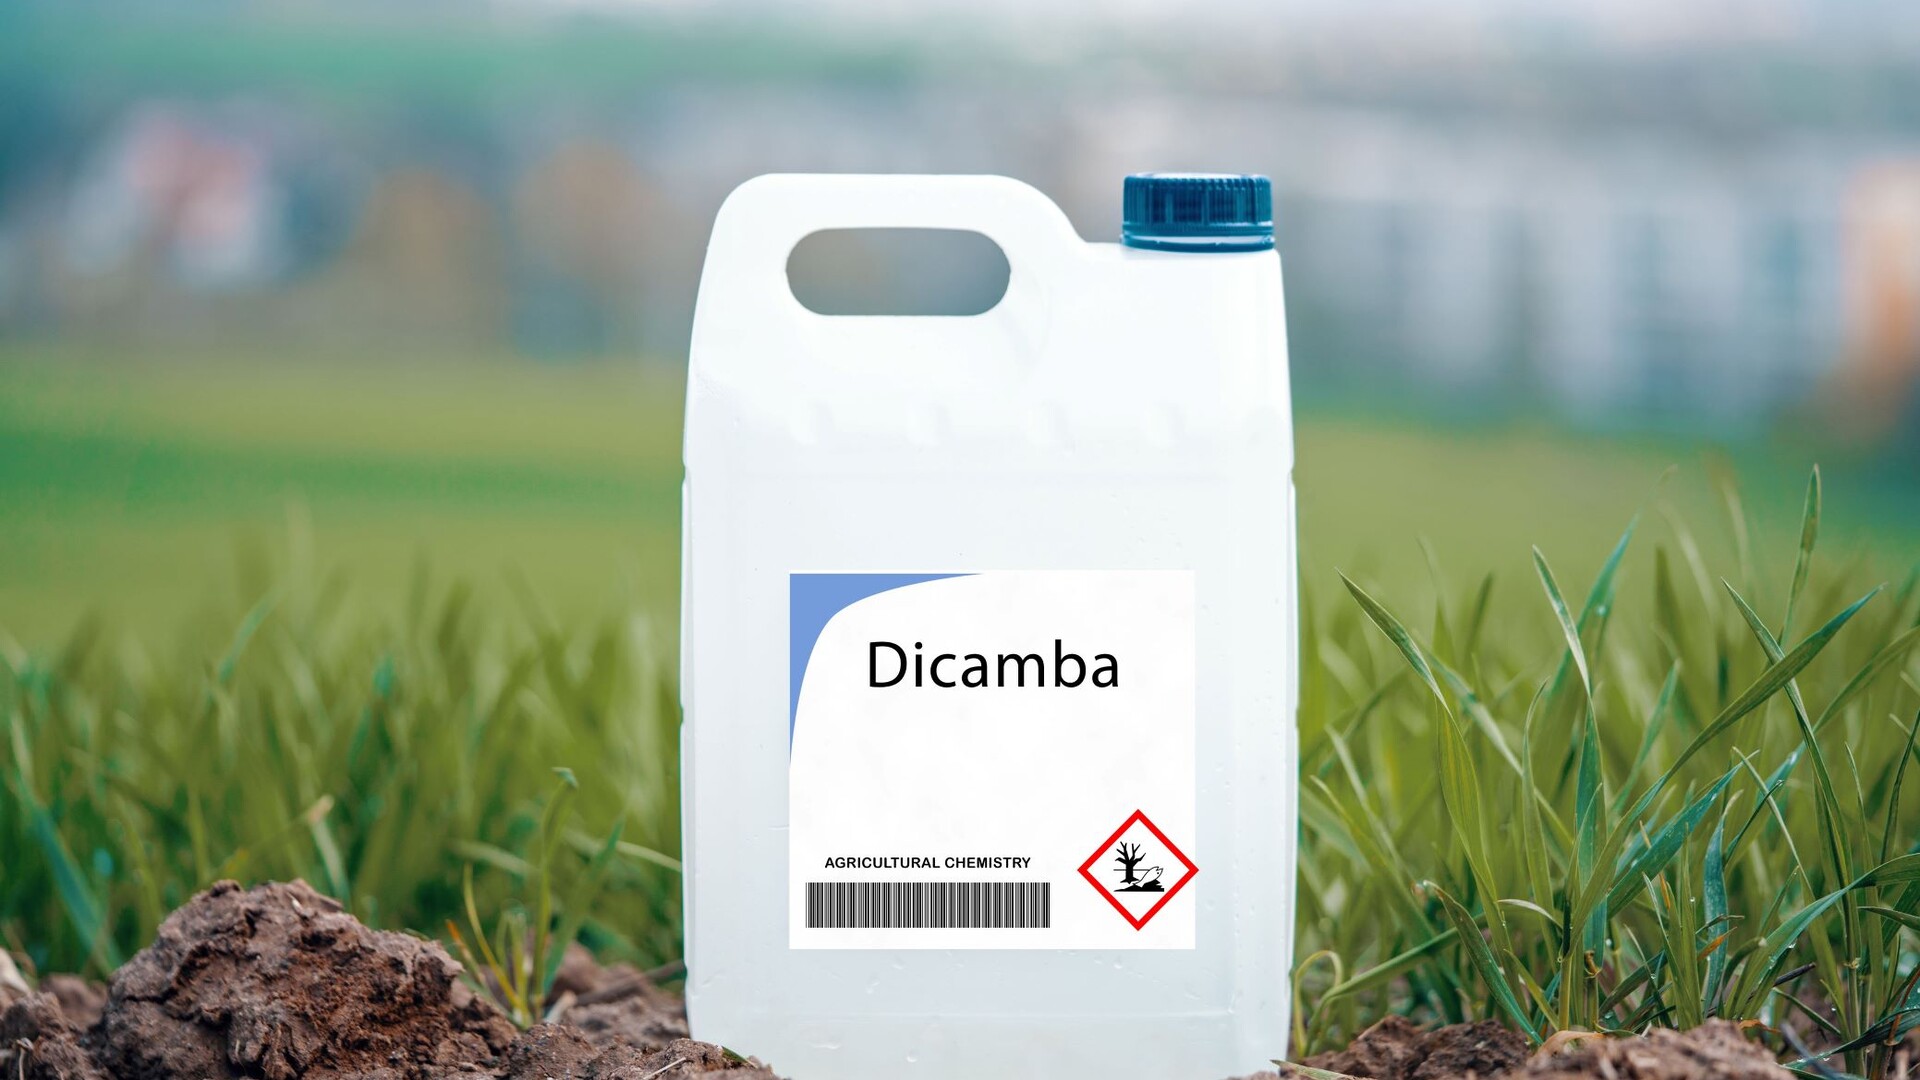 Is the Dicamba Decision Based on Science or Approval Procedure Error?